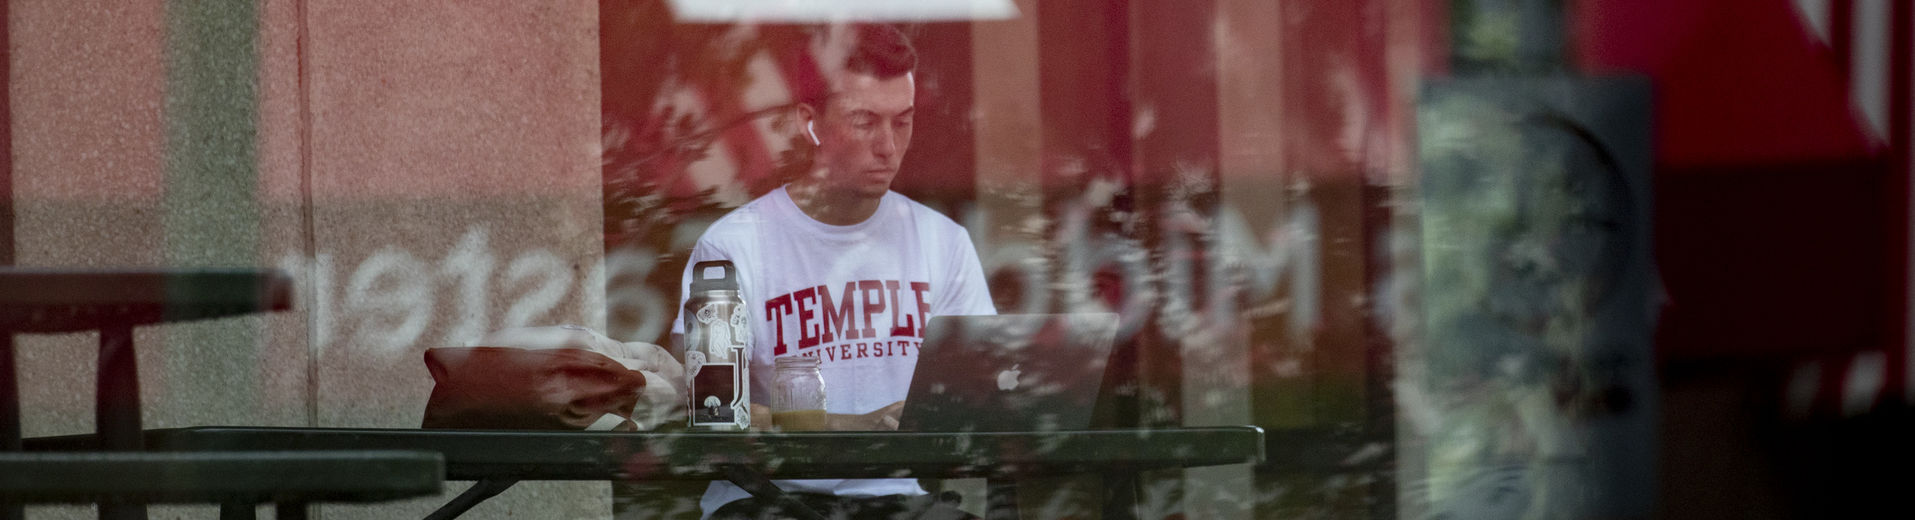 A student working on a laptop while sitting outside on Temple’s Main Campus.